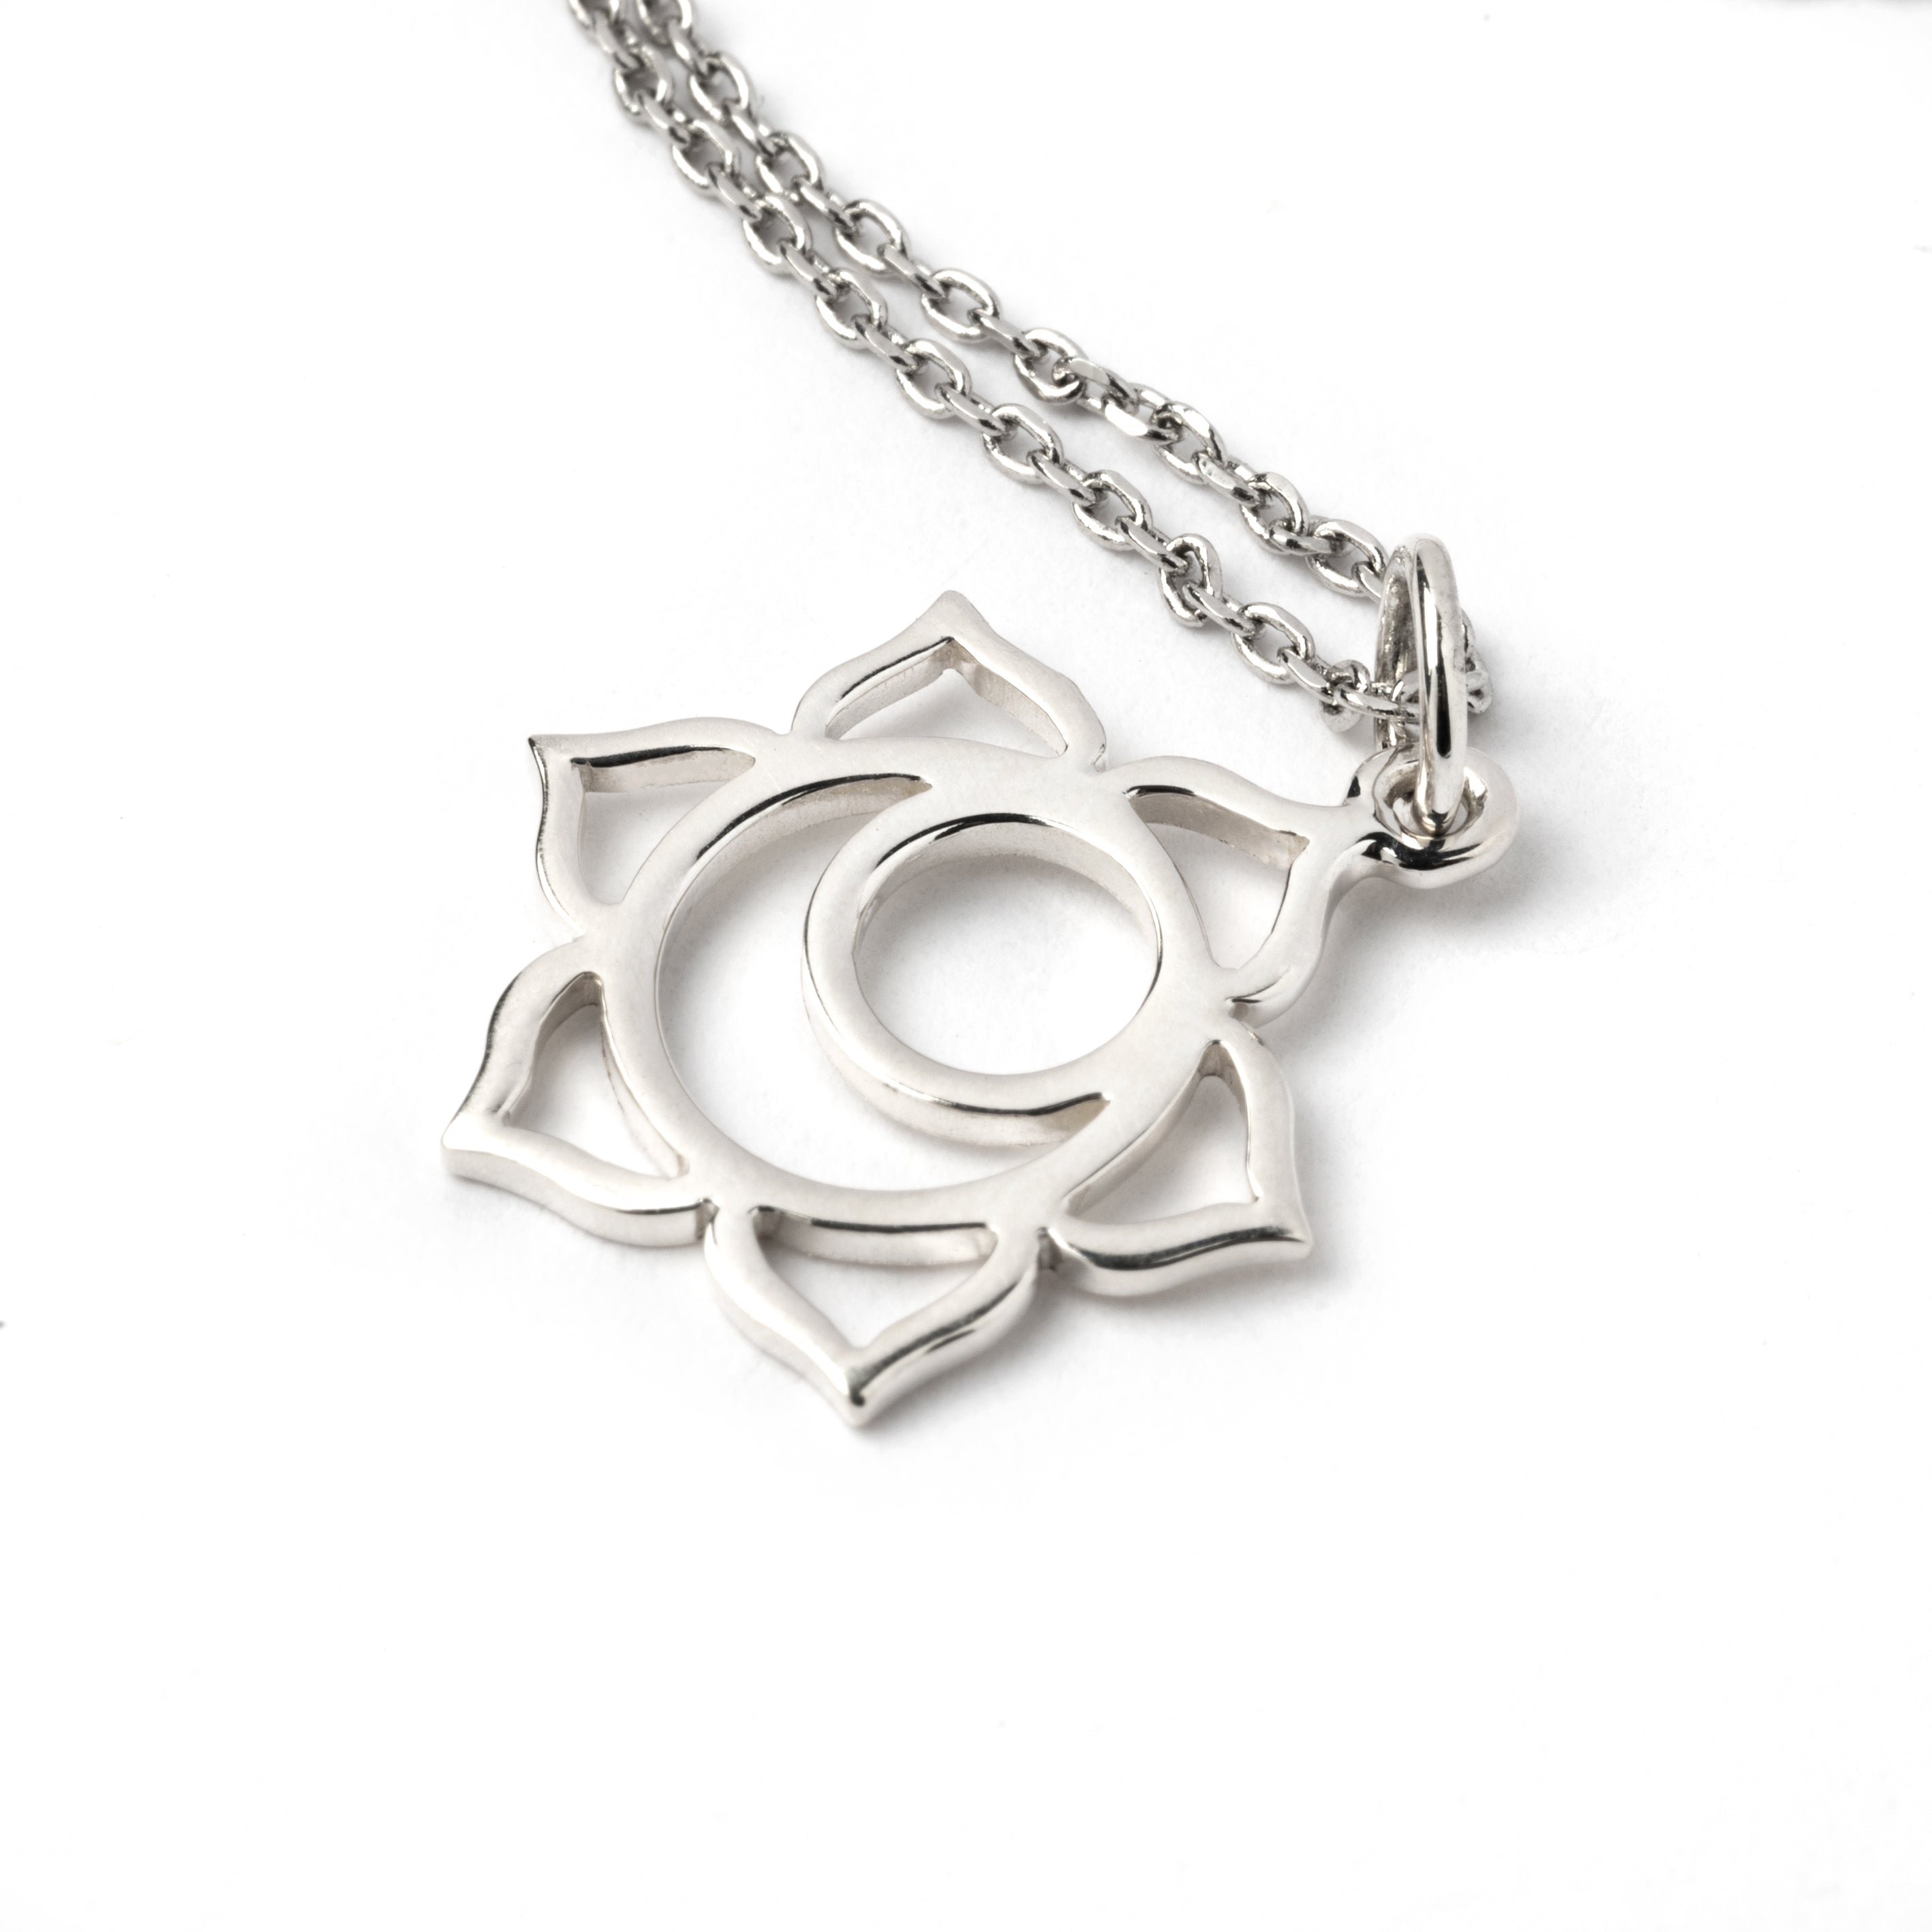 Sterling Silver Sacral Chakra Charm Necklace. The sacral chakra is the second chakra out of seven in the body&